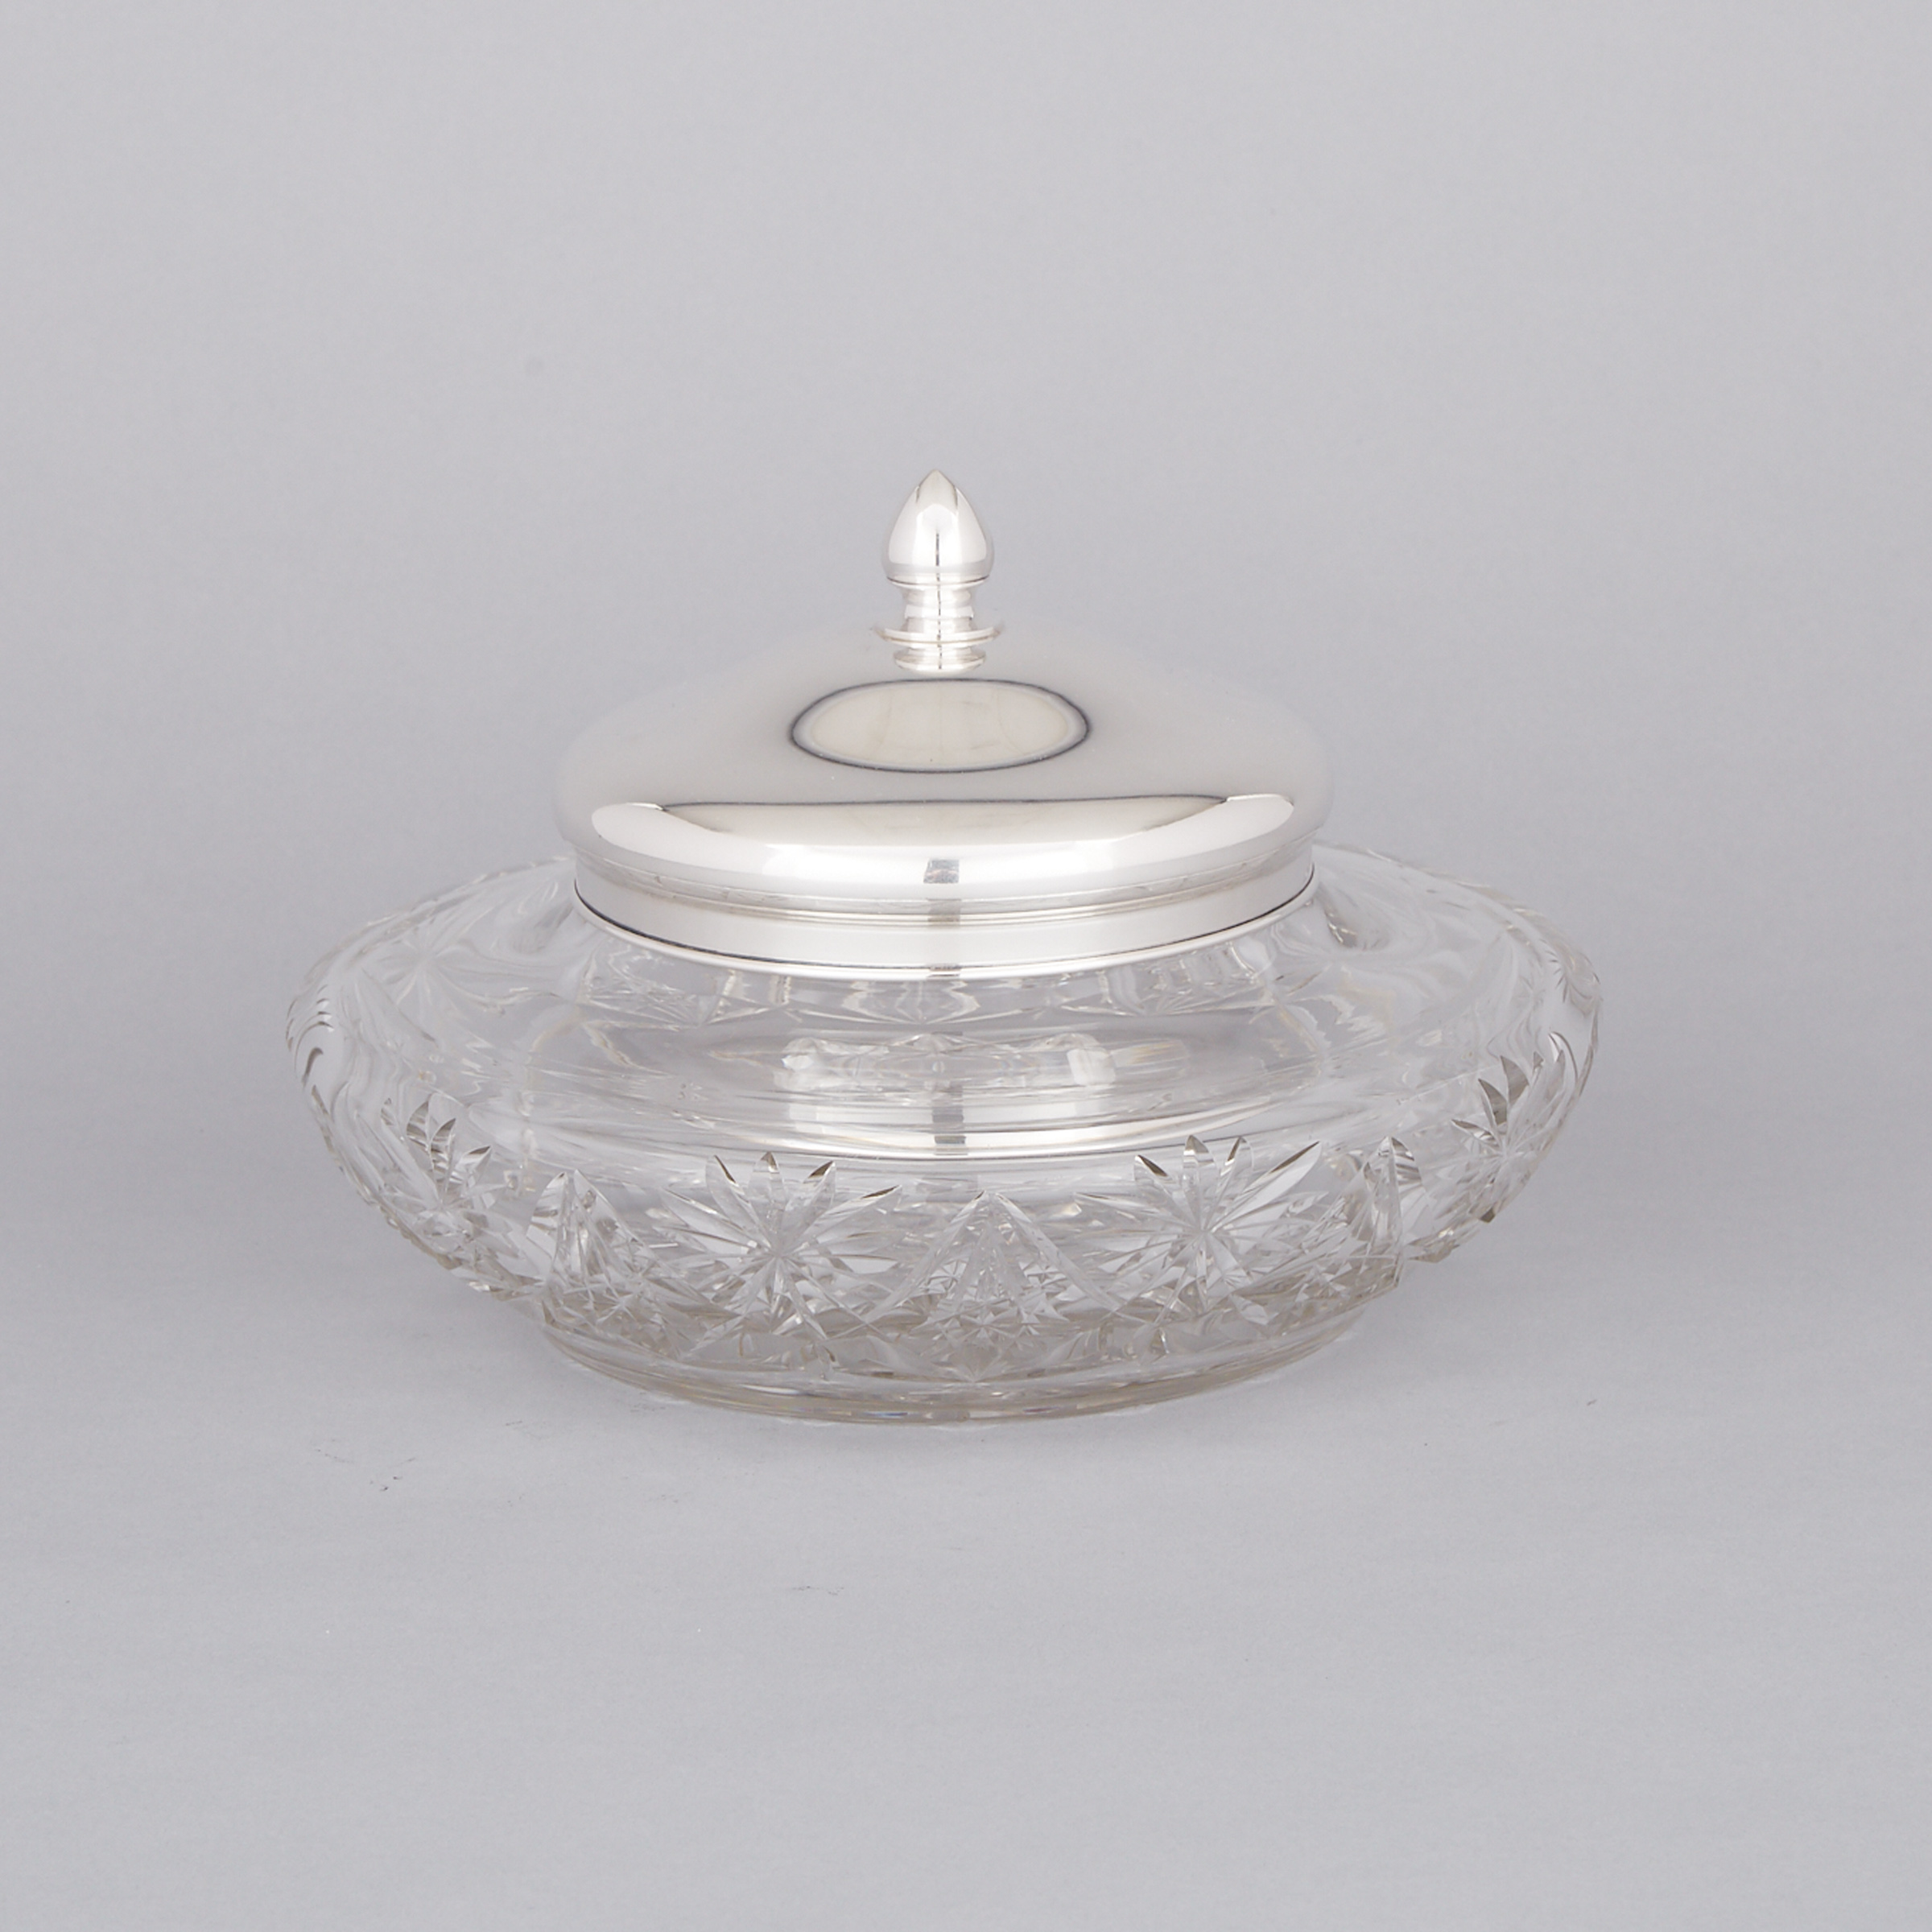 Czechoslovakian Silver Mounted Cut Glass Bowl with Cover, 1920s